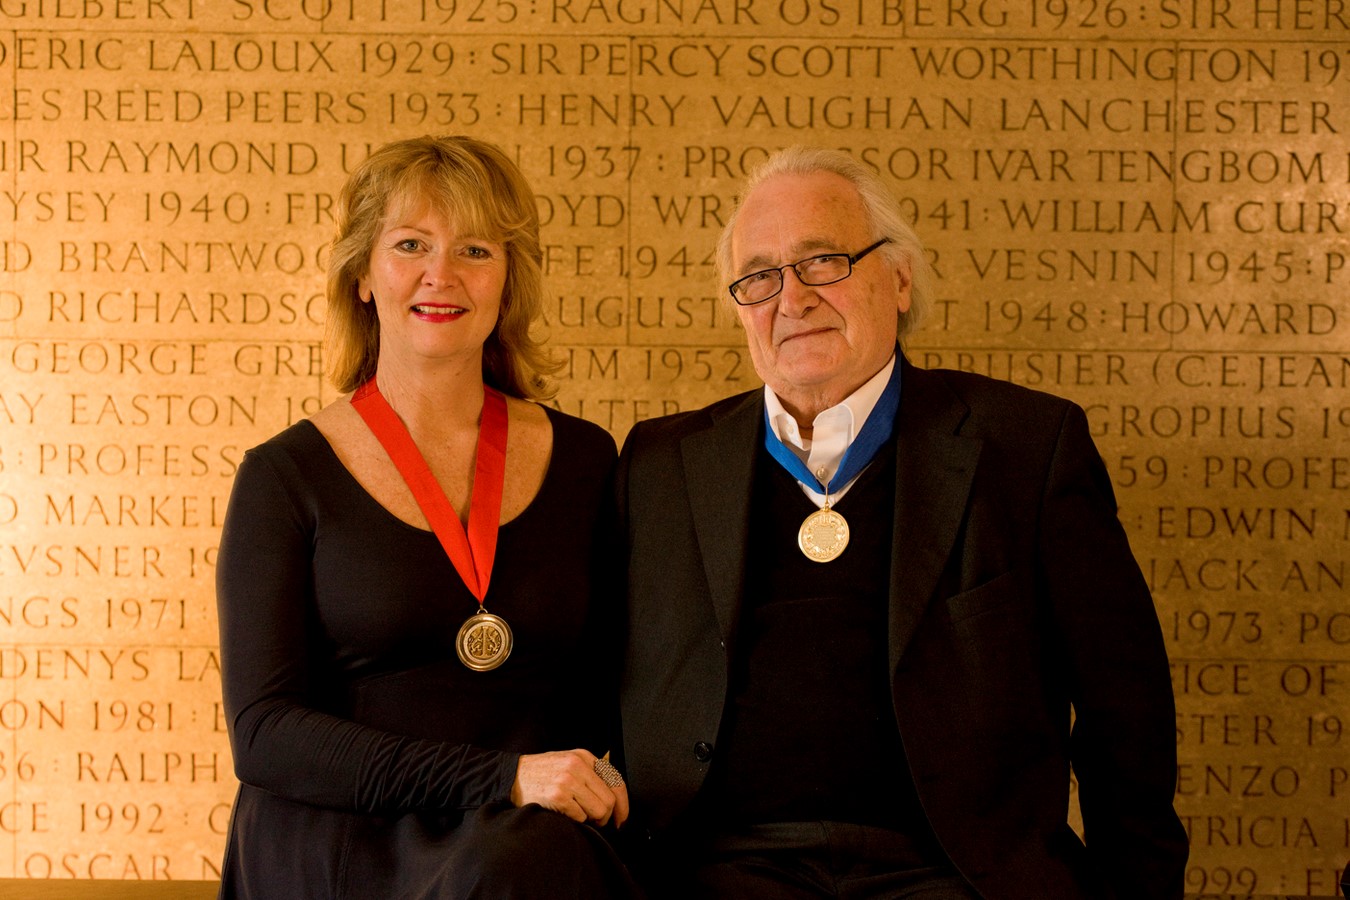 Royal Gold Medal received by Mr. Hertzberger_©The Architects' Journal